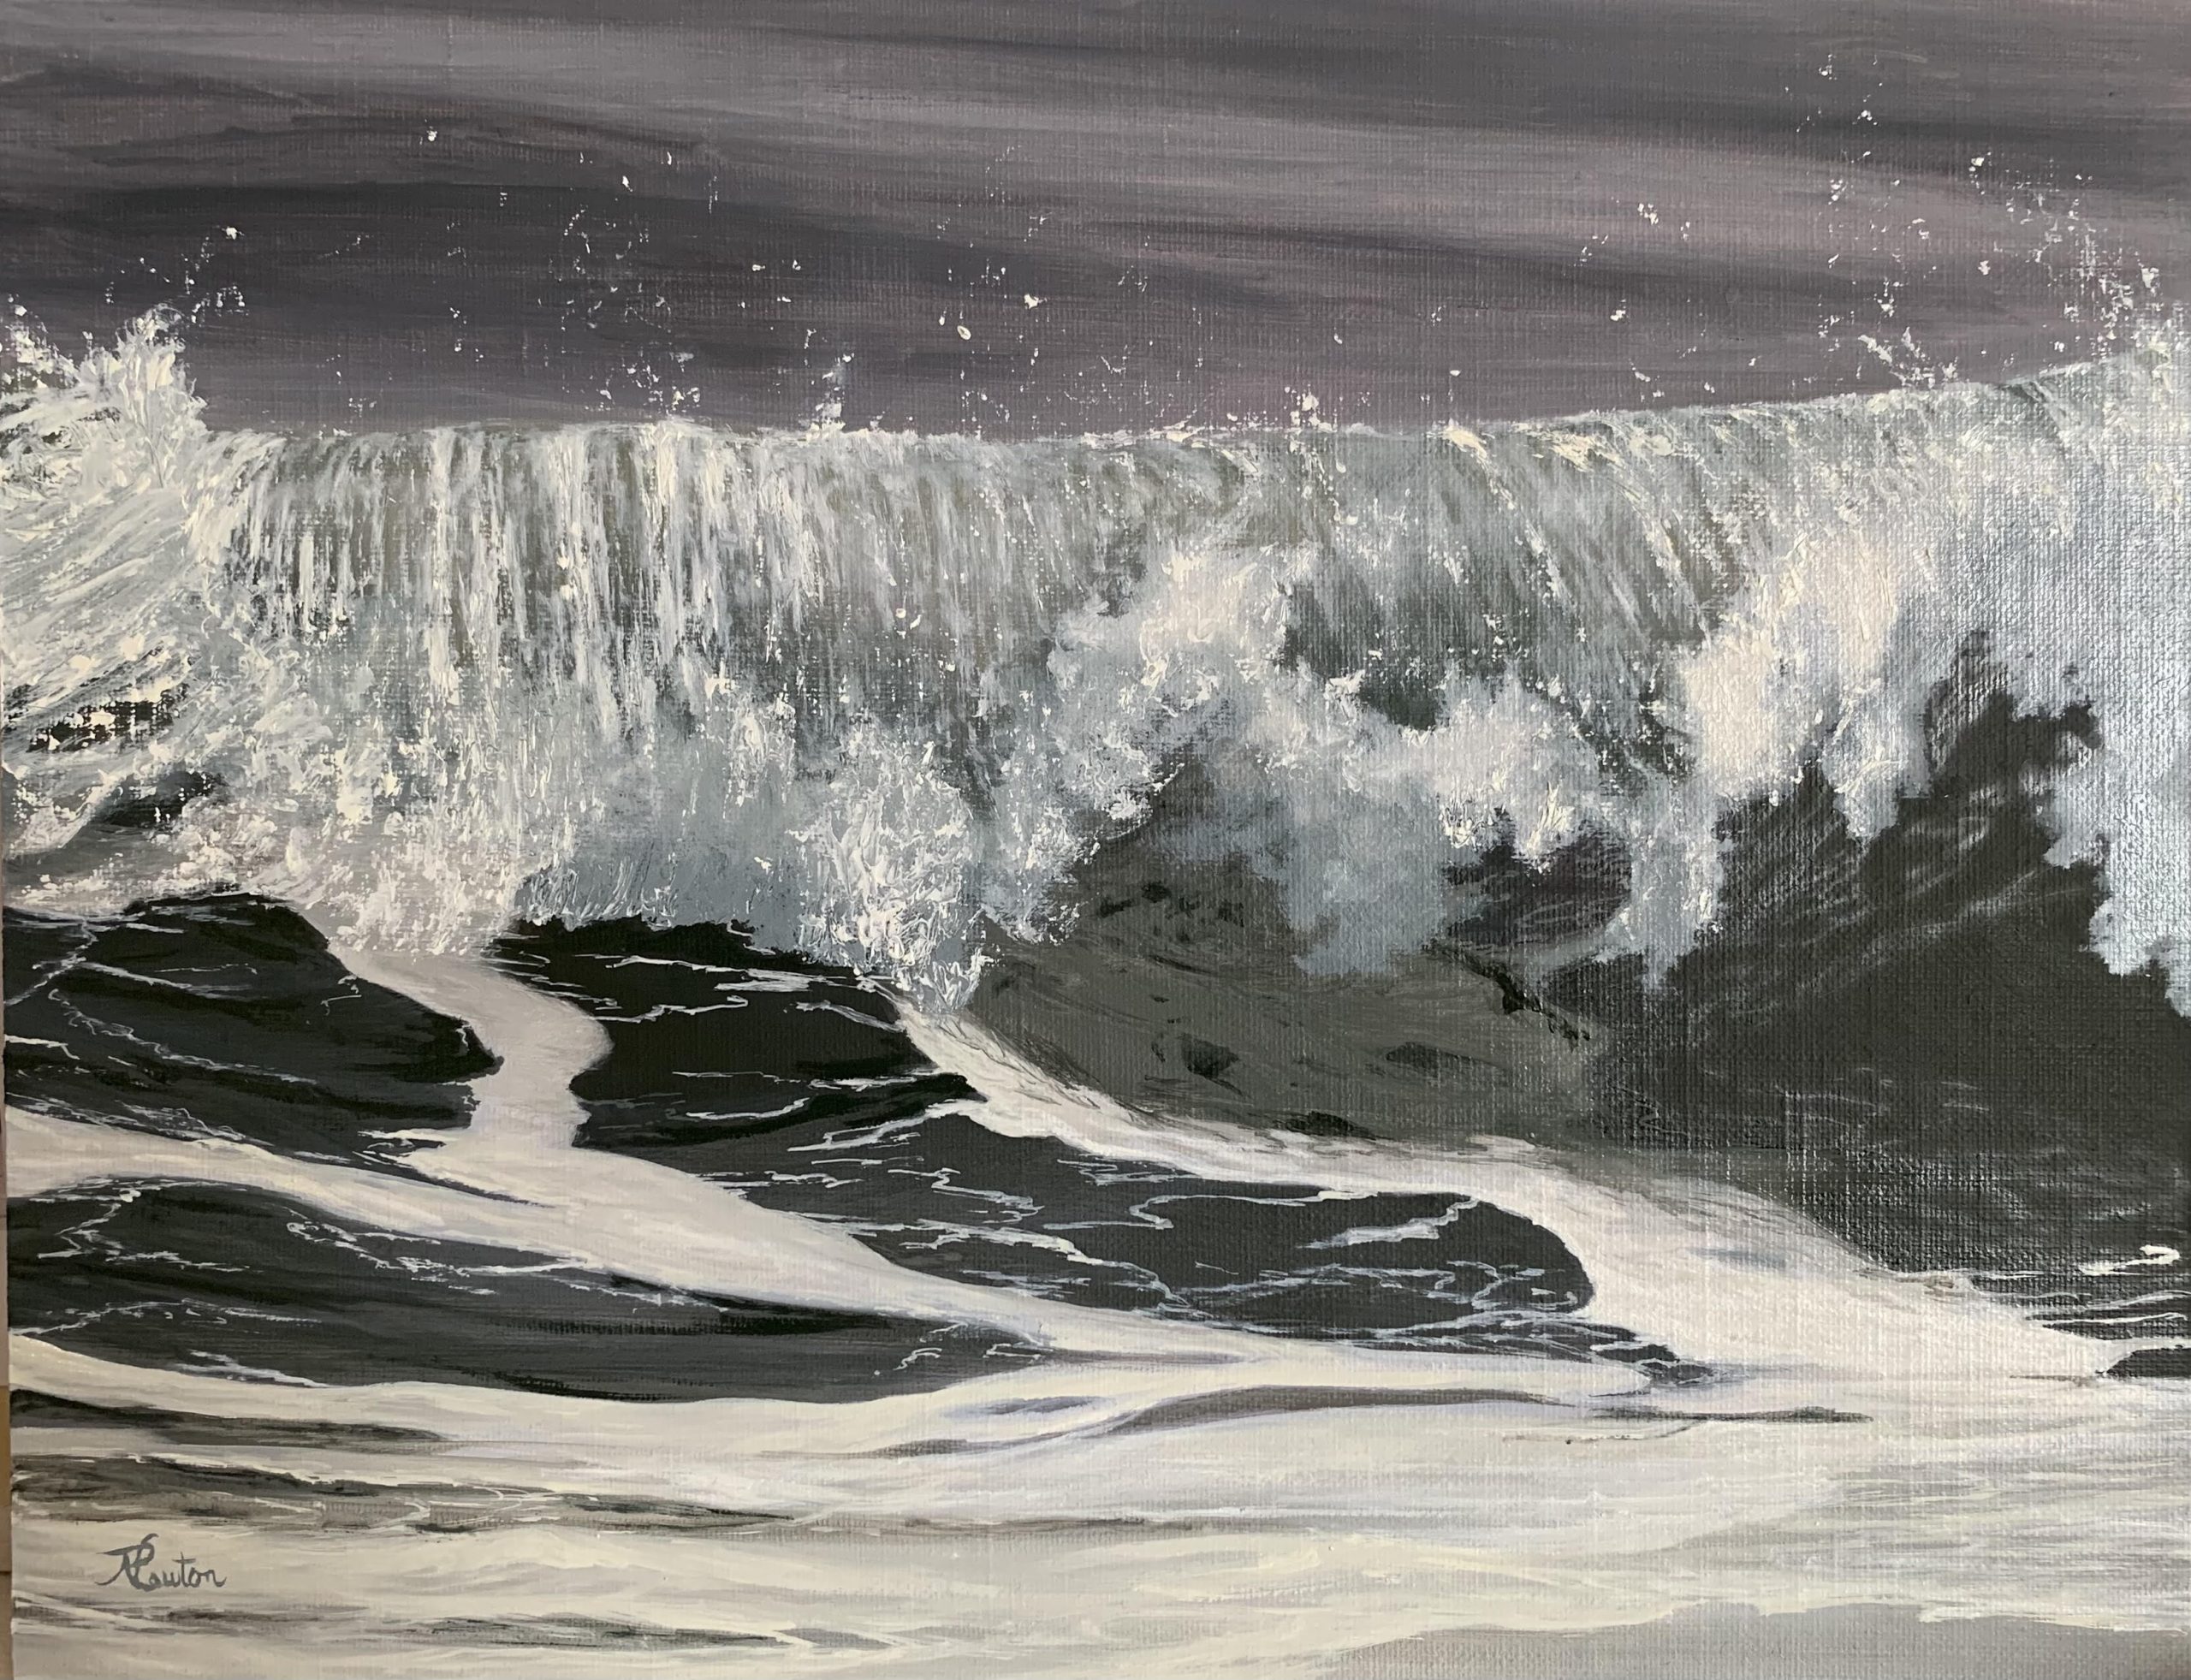 Rip Curl 11x14, Oil on linen panel $700.